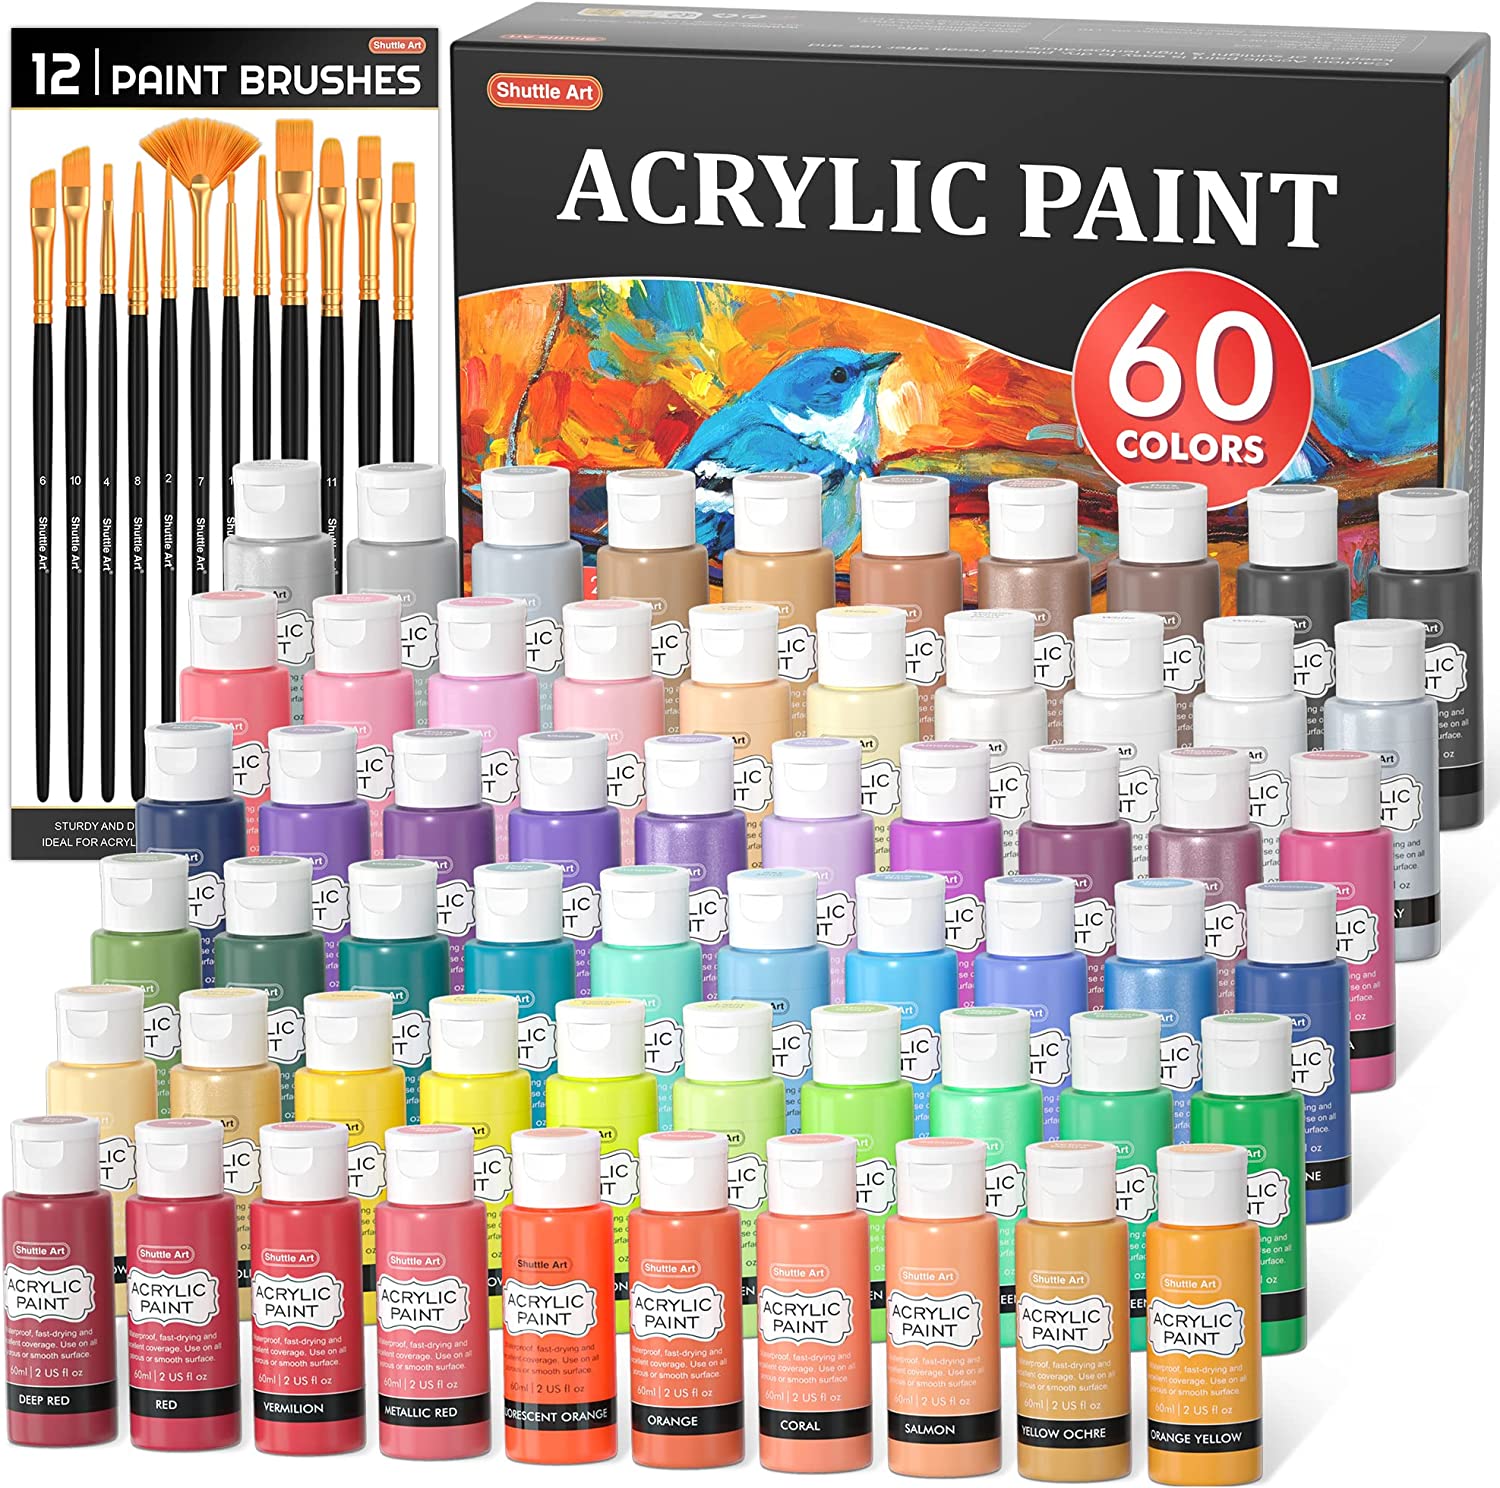 Apple Barrel Acrylic Paint in Assorted Colors (16 Ounce), 21148 Black